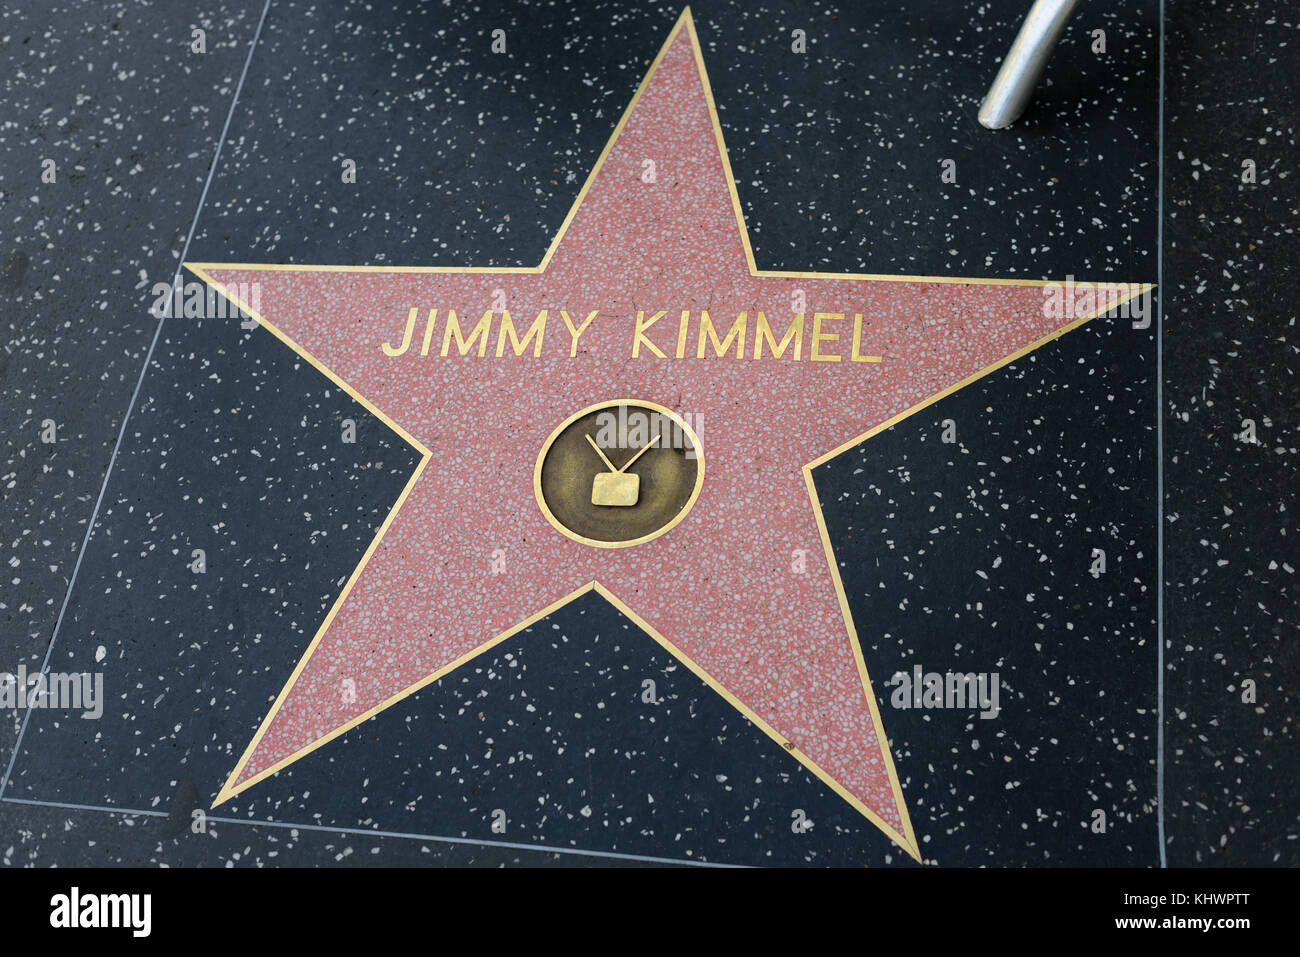 HOLLYWOOD, CA - DECEMBER 06: Jimmy Kimmel star on the Hollywood Walk of Fame in Hollywood, California on Dec. 6, 2016. Stock Photo